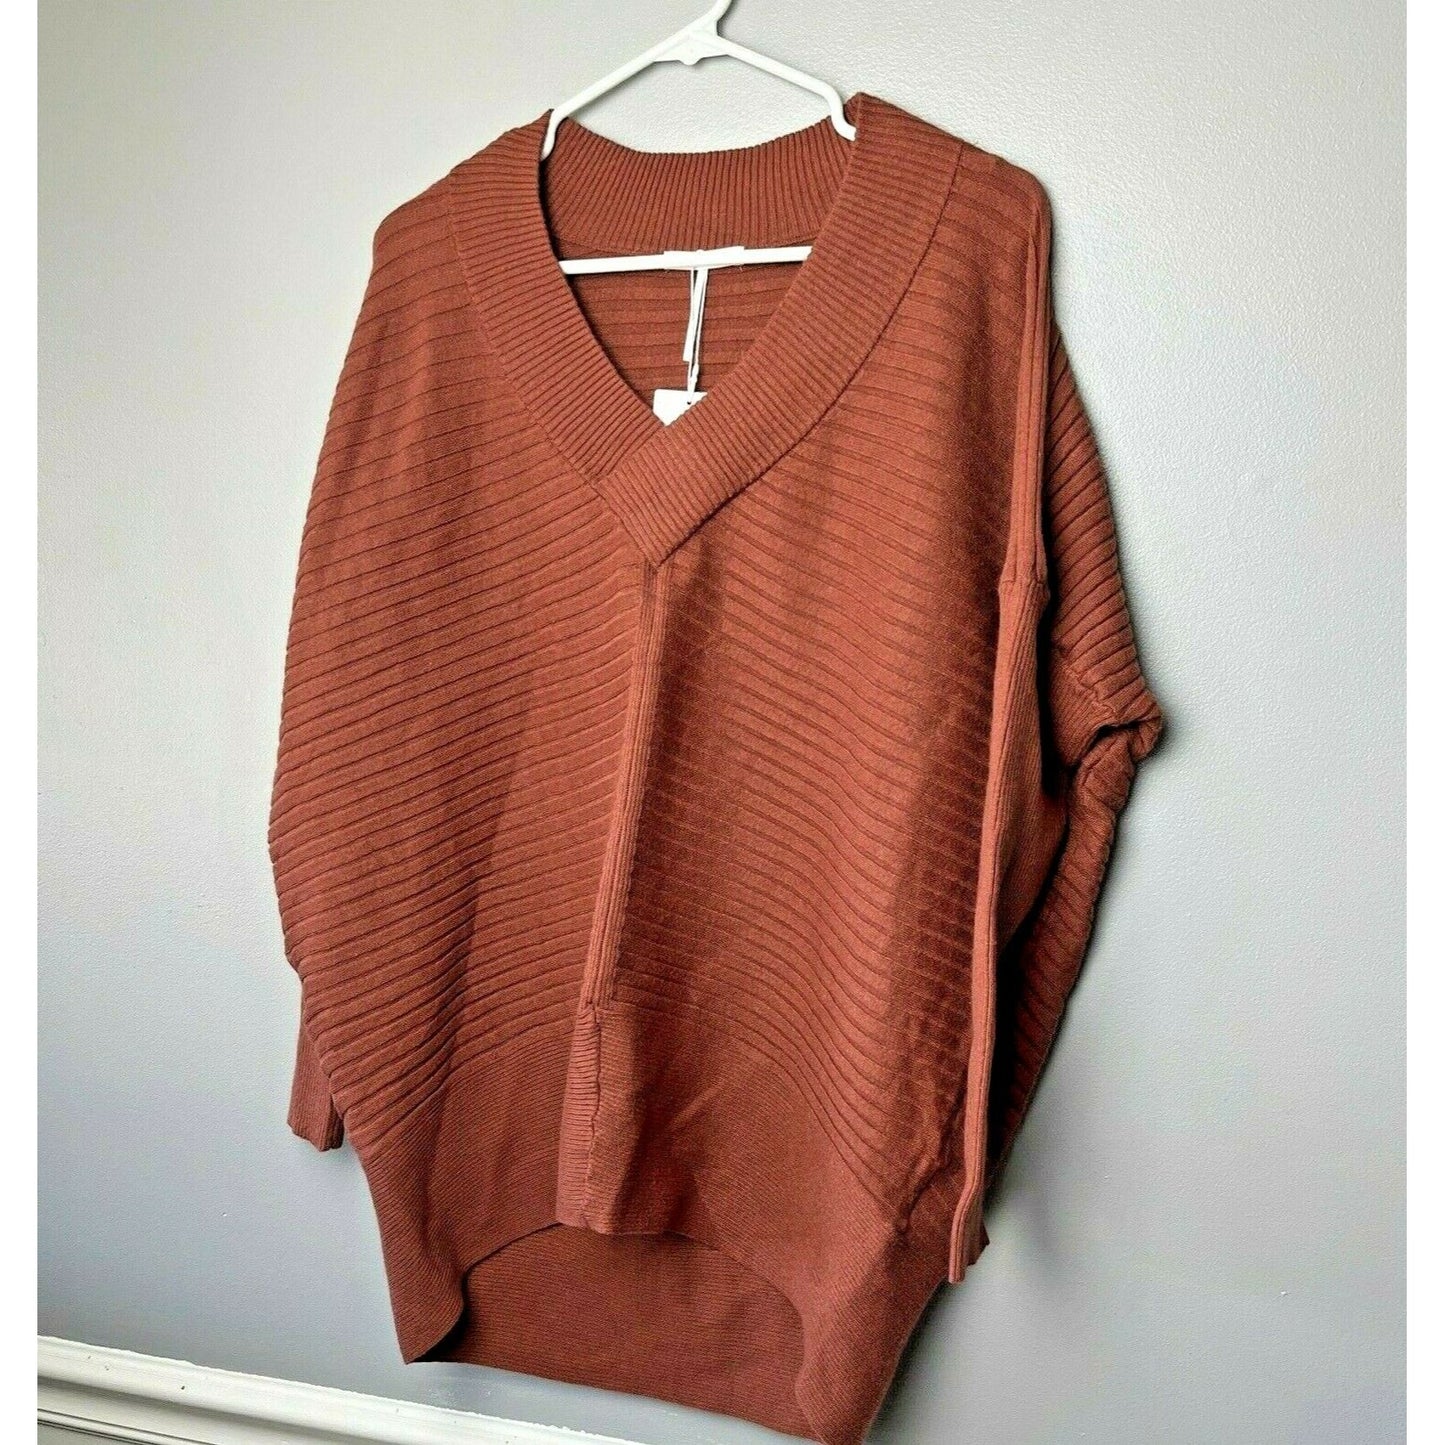 NWT Nordstrom Stitchdrop Crossover V-Neck  Sweater Women Size Small